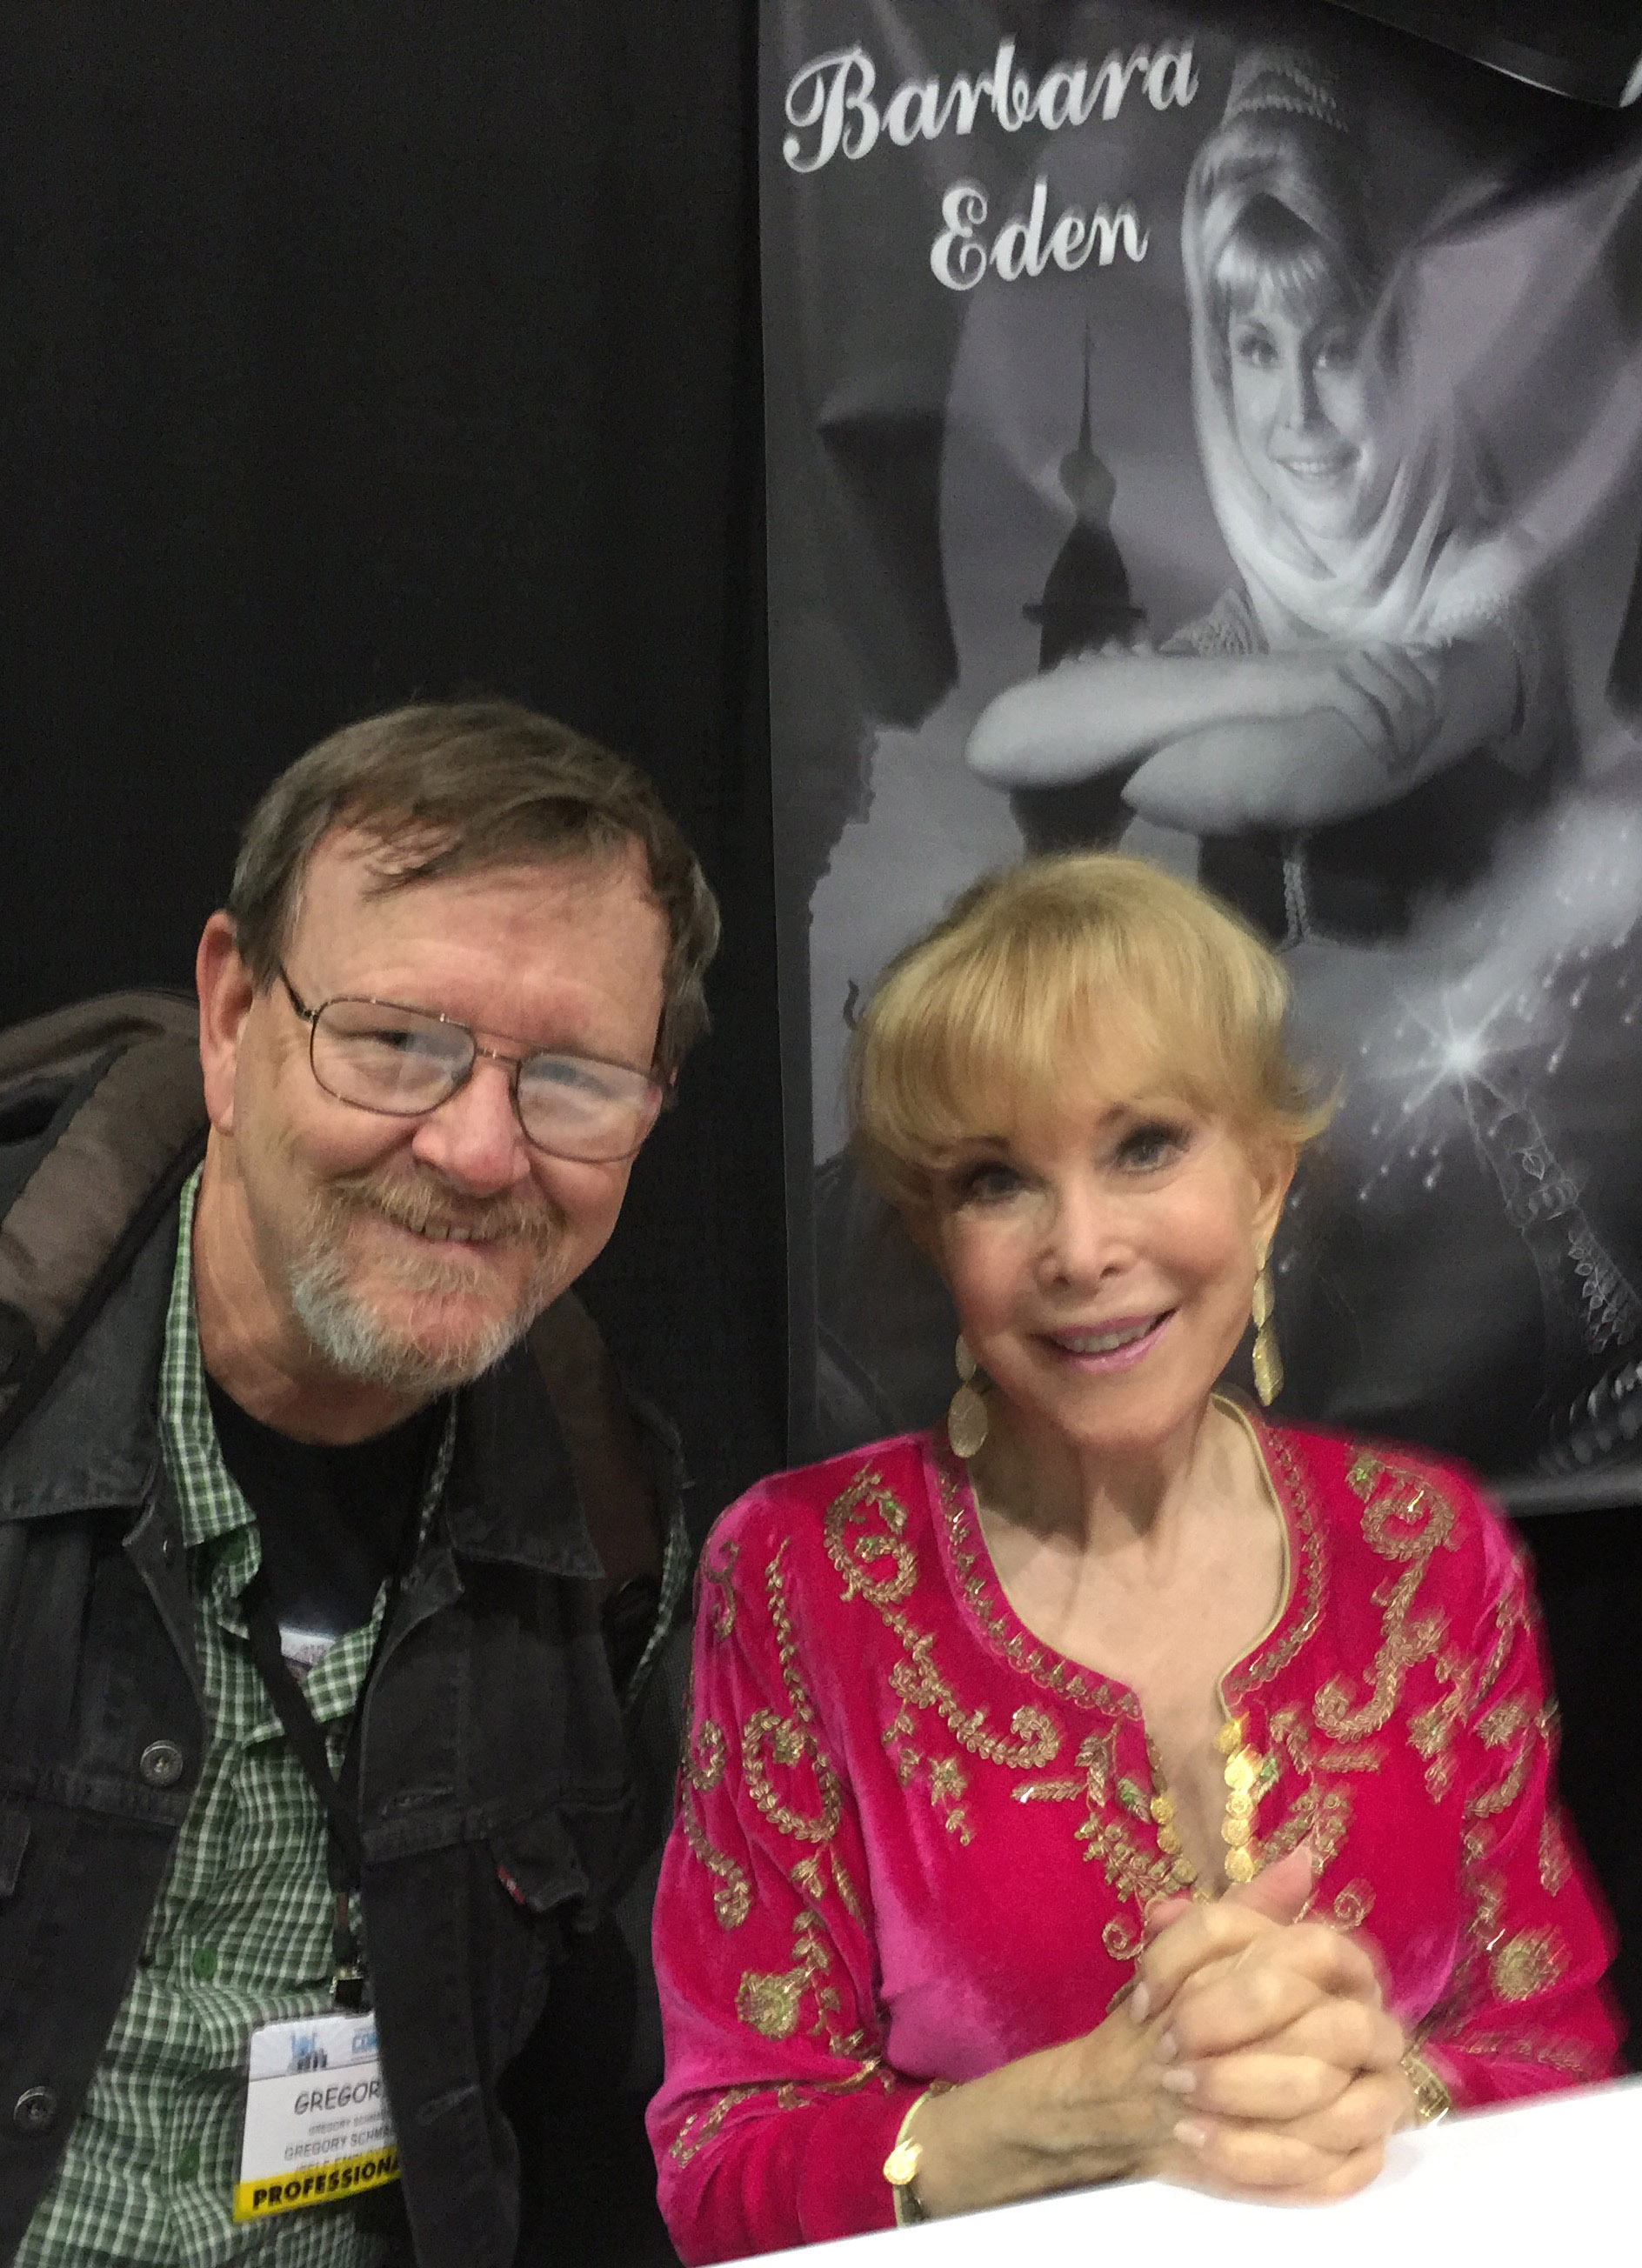 I'm pictured with Barbara Eden at the 2014 Stan Lee Comikaze Convention